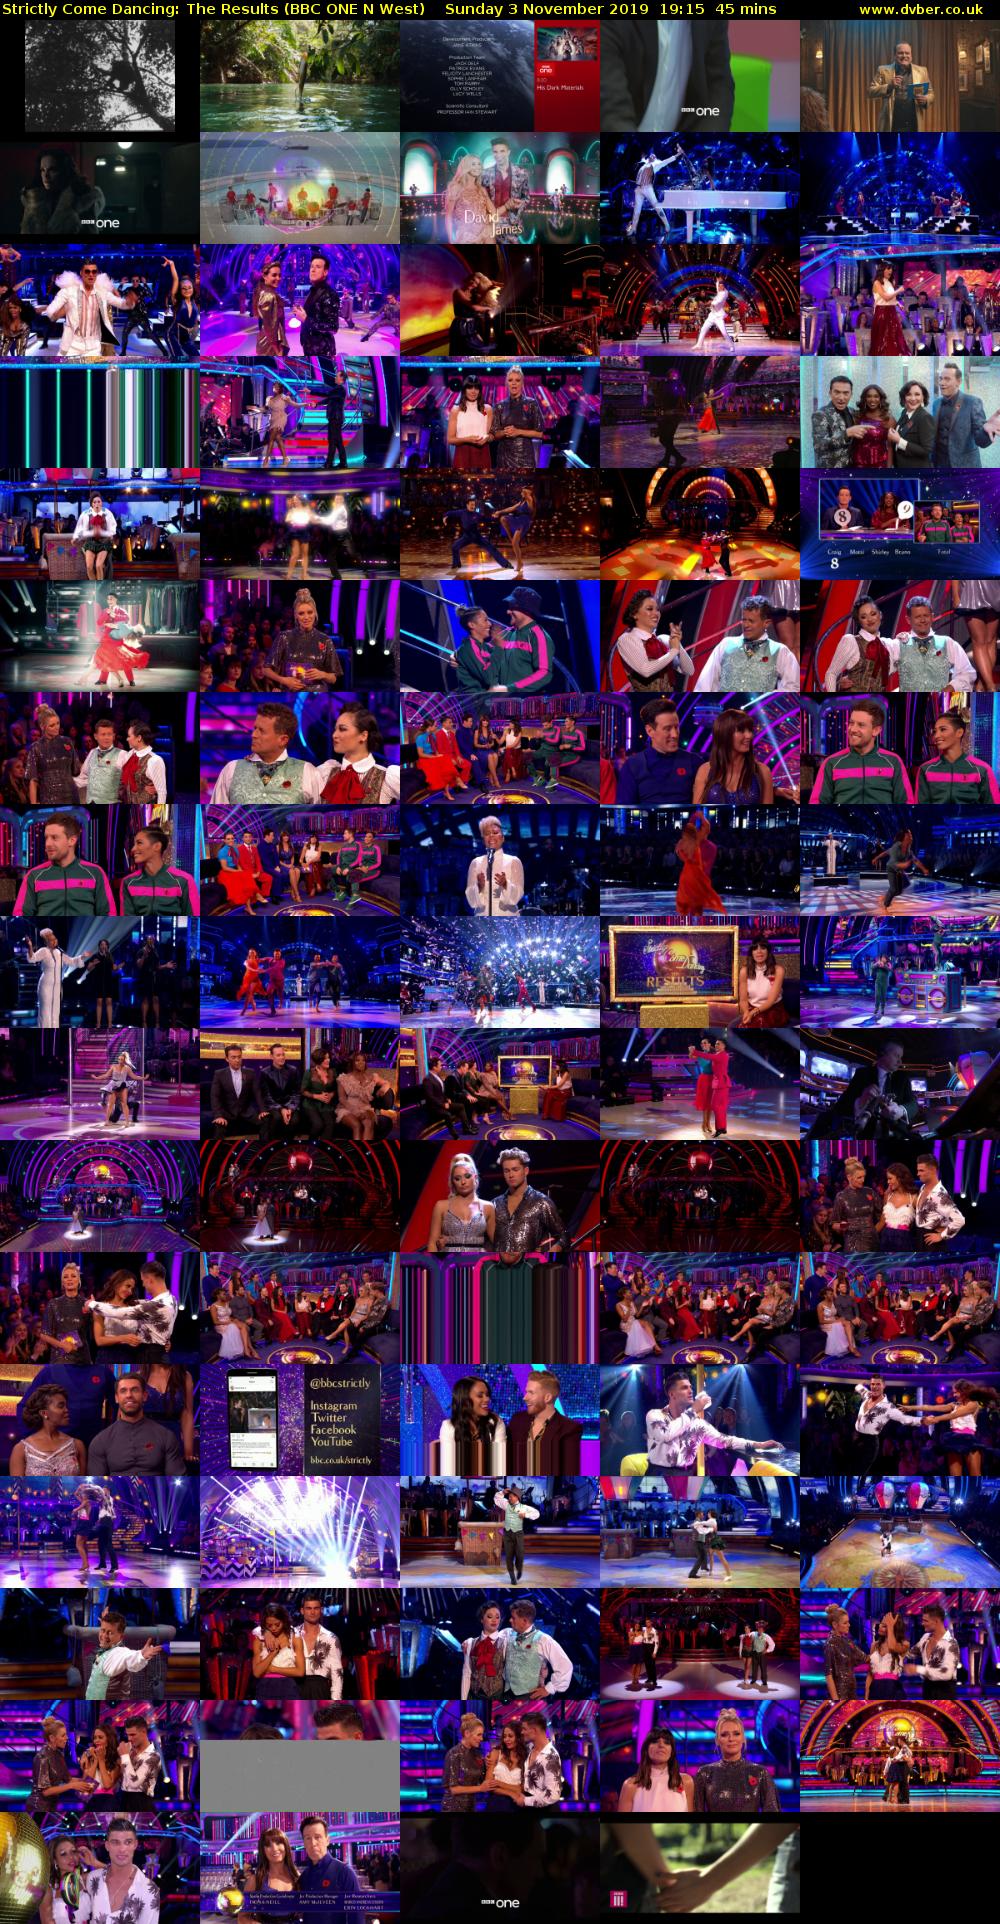 Strictly Come Dancing: The Results (BBC ONE N West) Sunday 3 November 2019 19:15 - 20:00